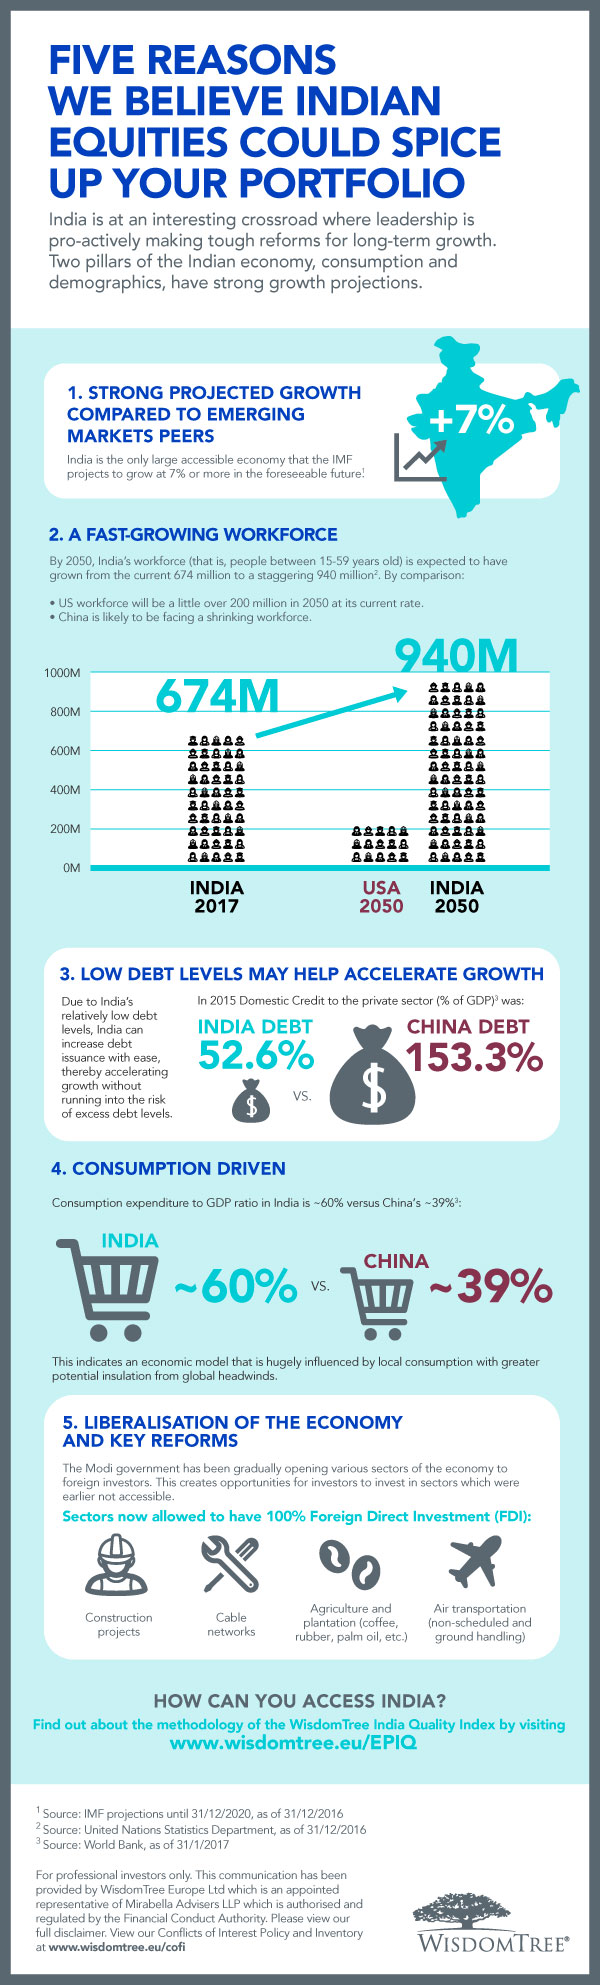 Indian equities infographic